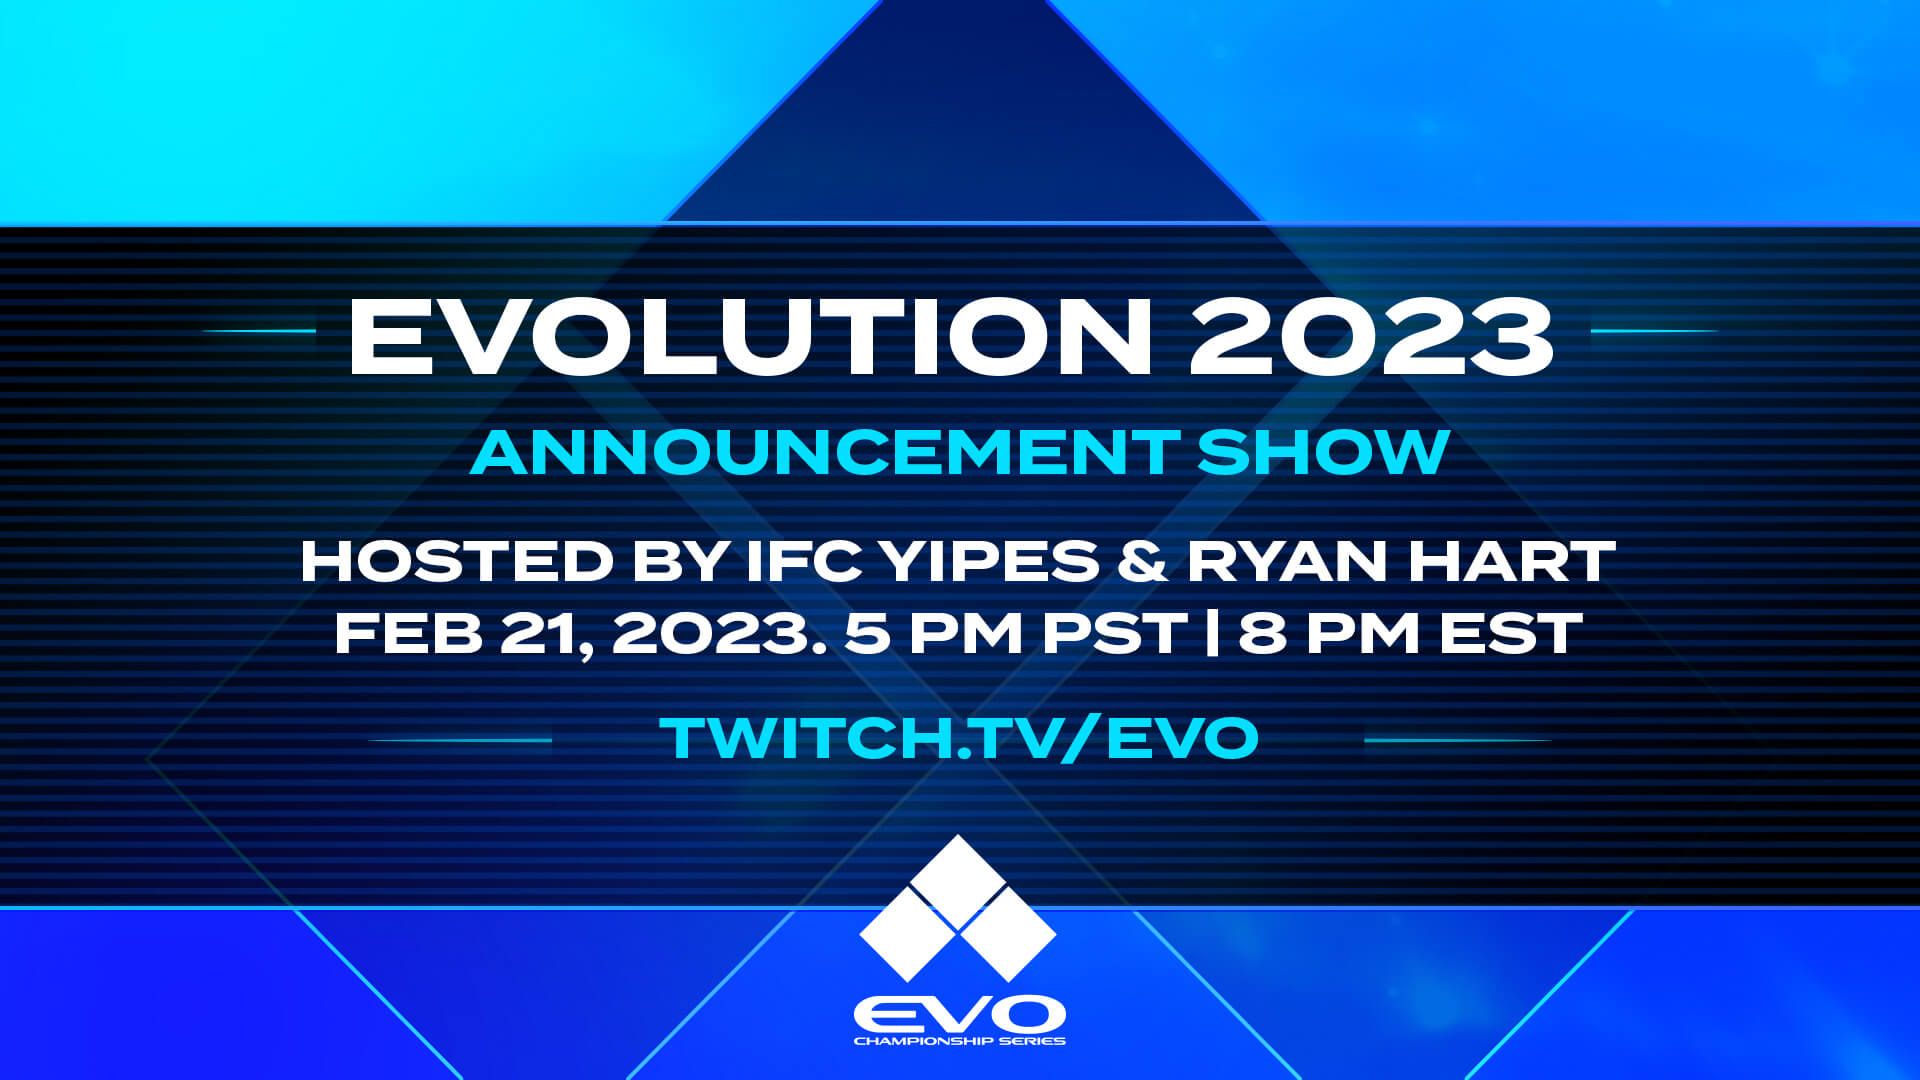 Evo 2023 Announcement Show Scheduled for the End of February